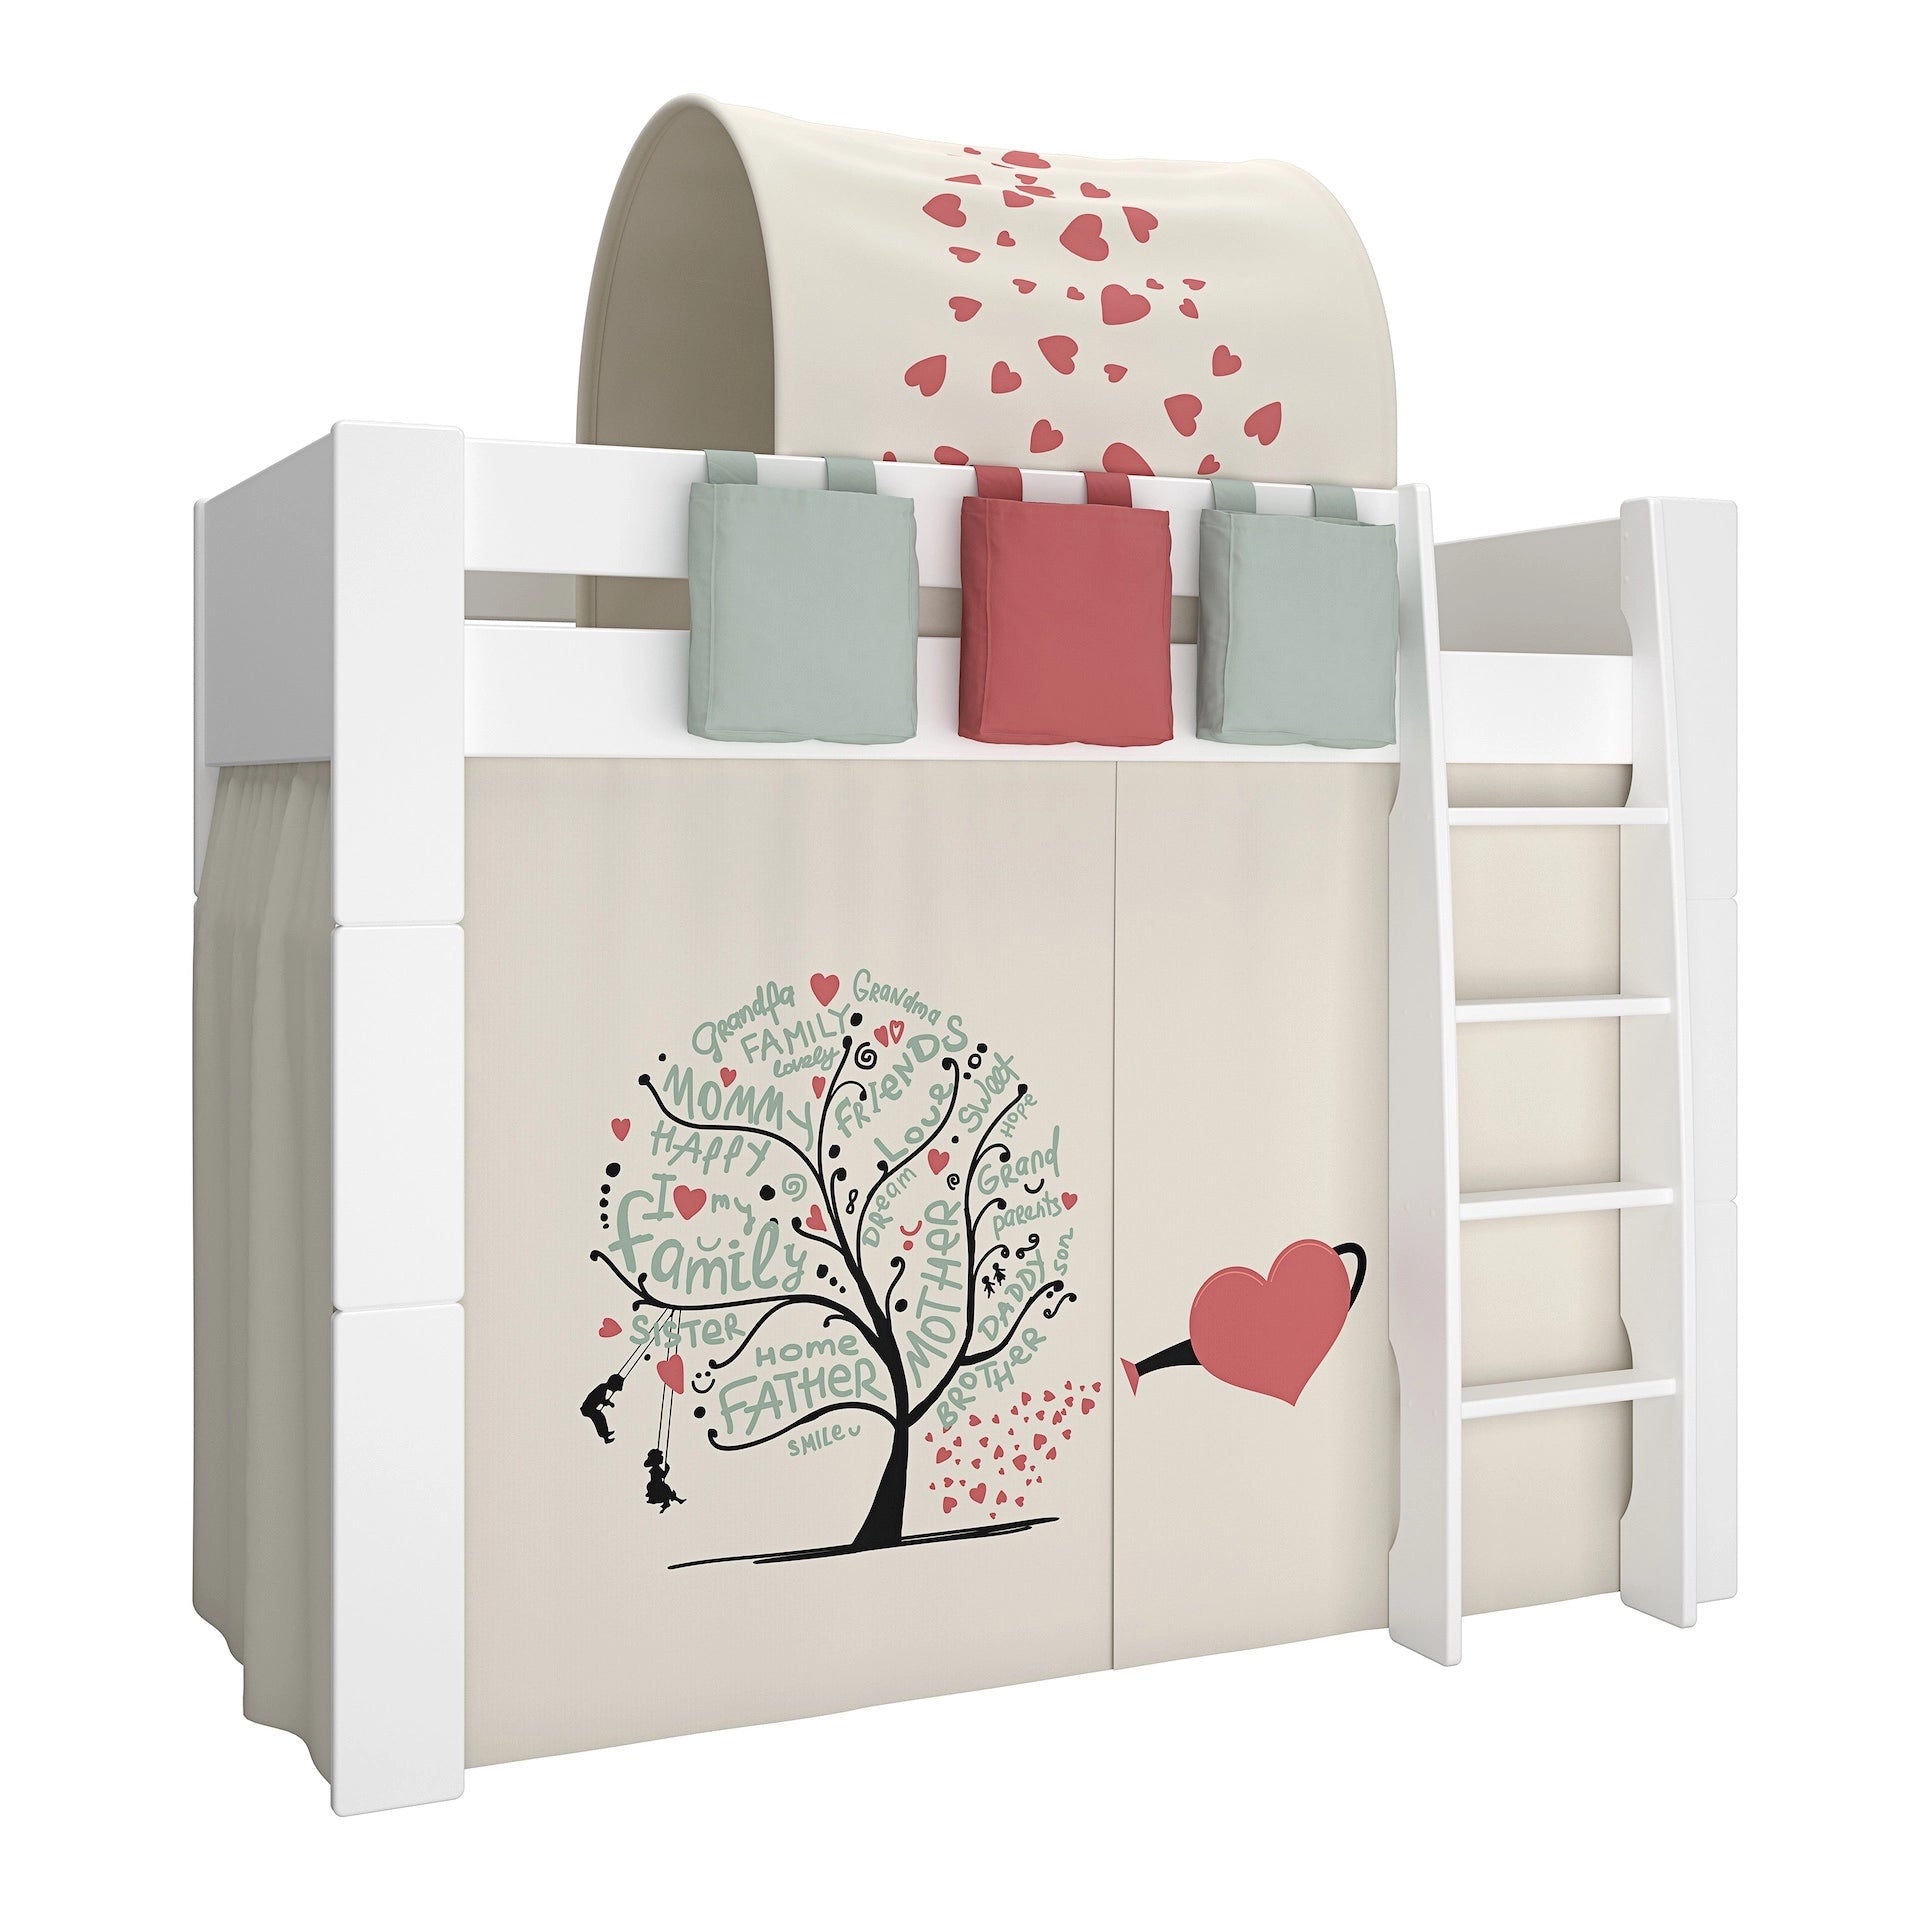 Furniture To Go Steens For Kids High Sleeper in Whitewash Grey Brown Lacquered, Includes - Tree of Life Tent + Tunnel + 2 Pockets in Green + 1 Pocket in Red